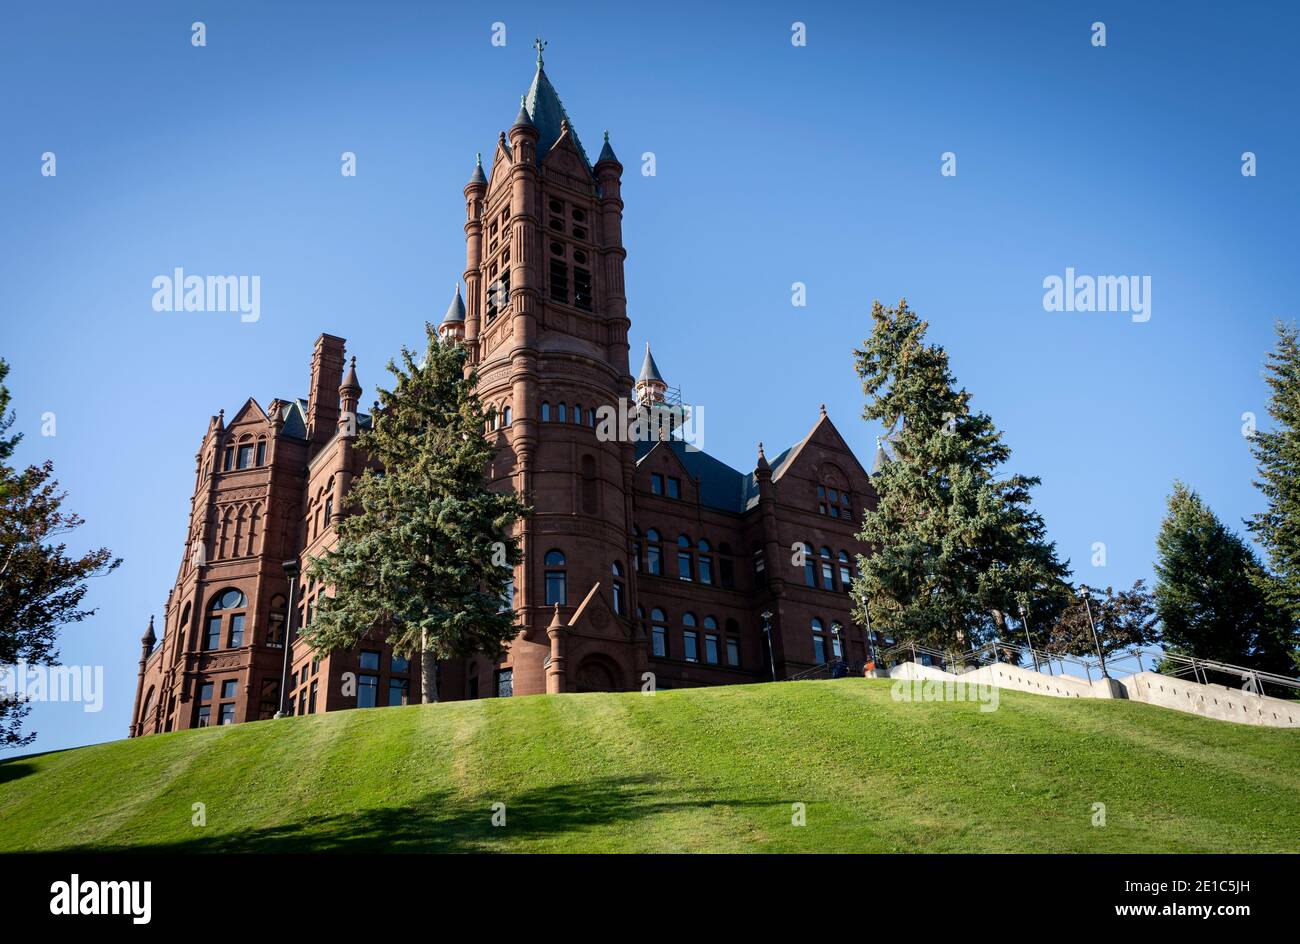 Crouse College sits atop a green grassy hill on the campus of Syracuse University in Syracuse, New York. Stock Photo